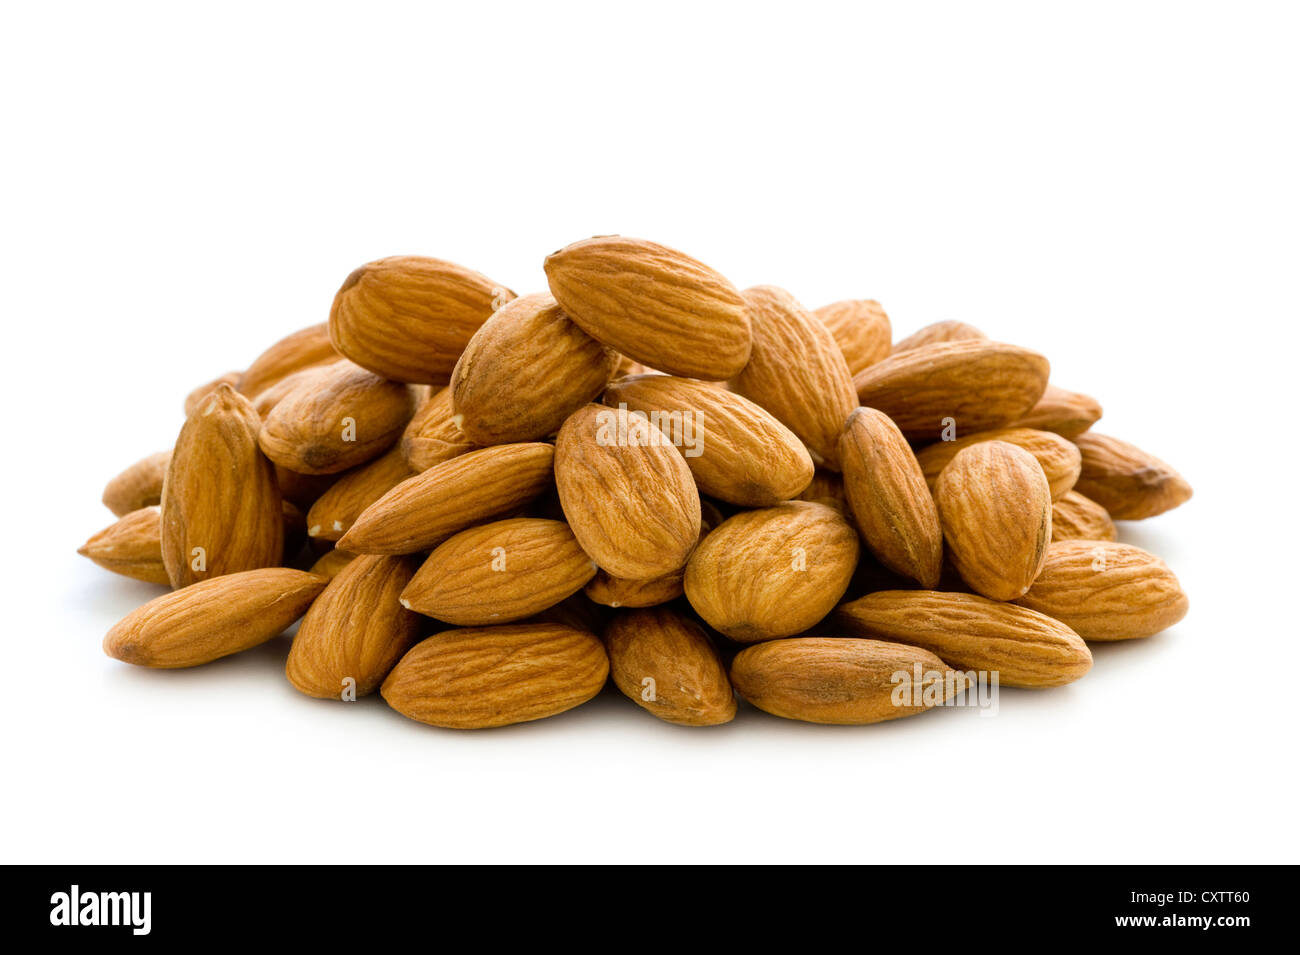 shelled whole almond nuts isolated on a white background Stock Photo